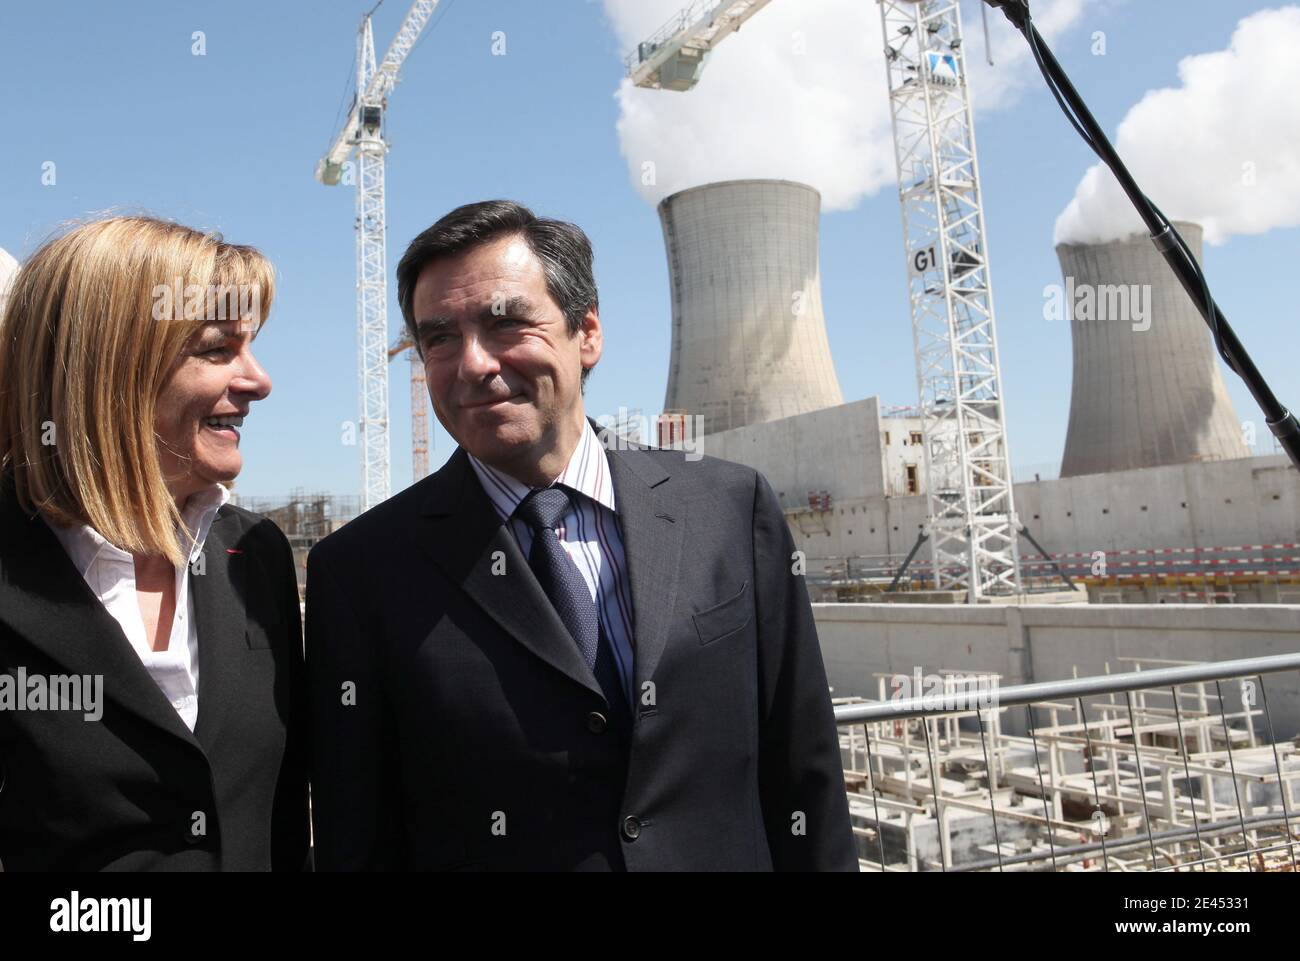 French Prime minister FranÀois Fillon and AREVA chief executive officer Anne Lauvergeon visit the French Areva power company Tricastin nuclear plant in Bollene, southeastern France, May 18, 2009. Photos by Vincent Dargent/ABACAPRESS.COM Stock Photo